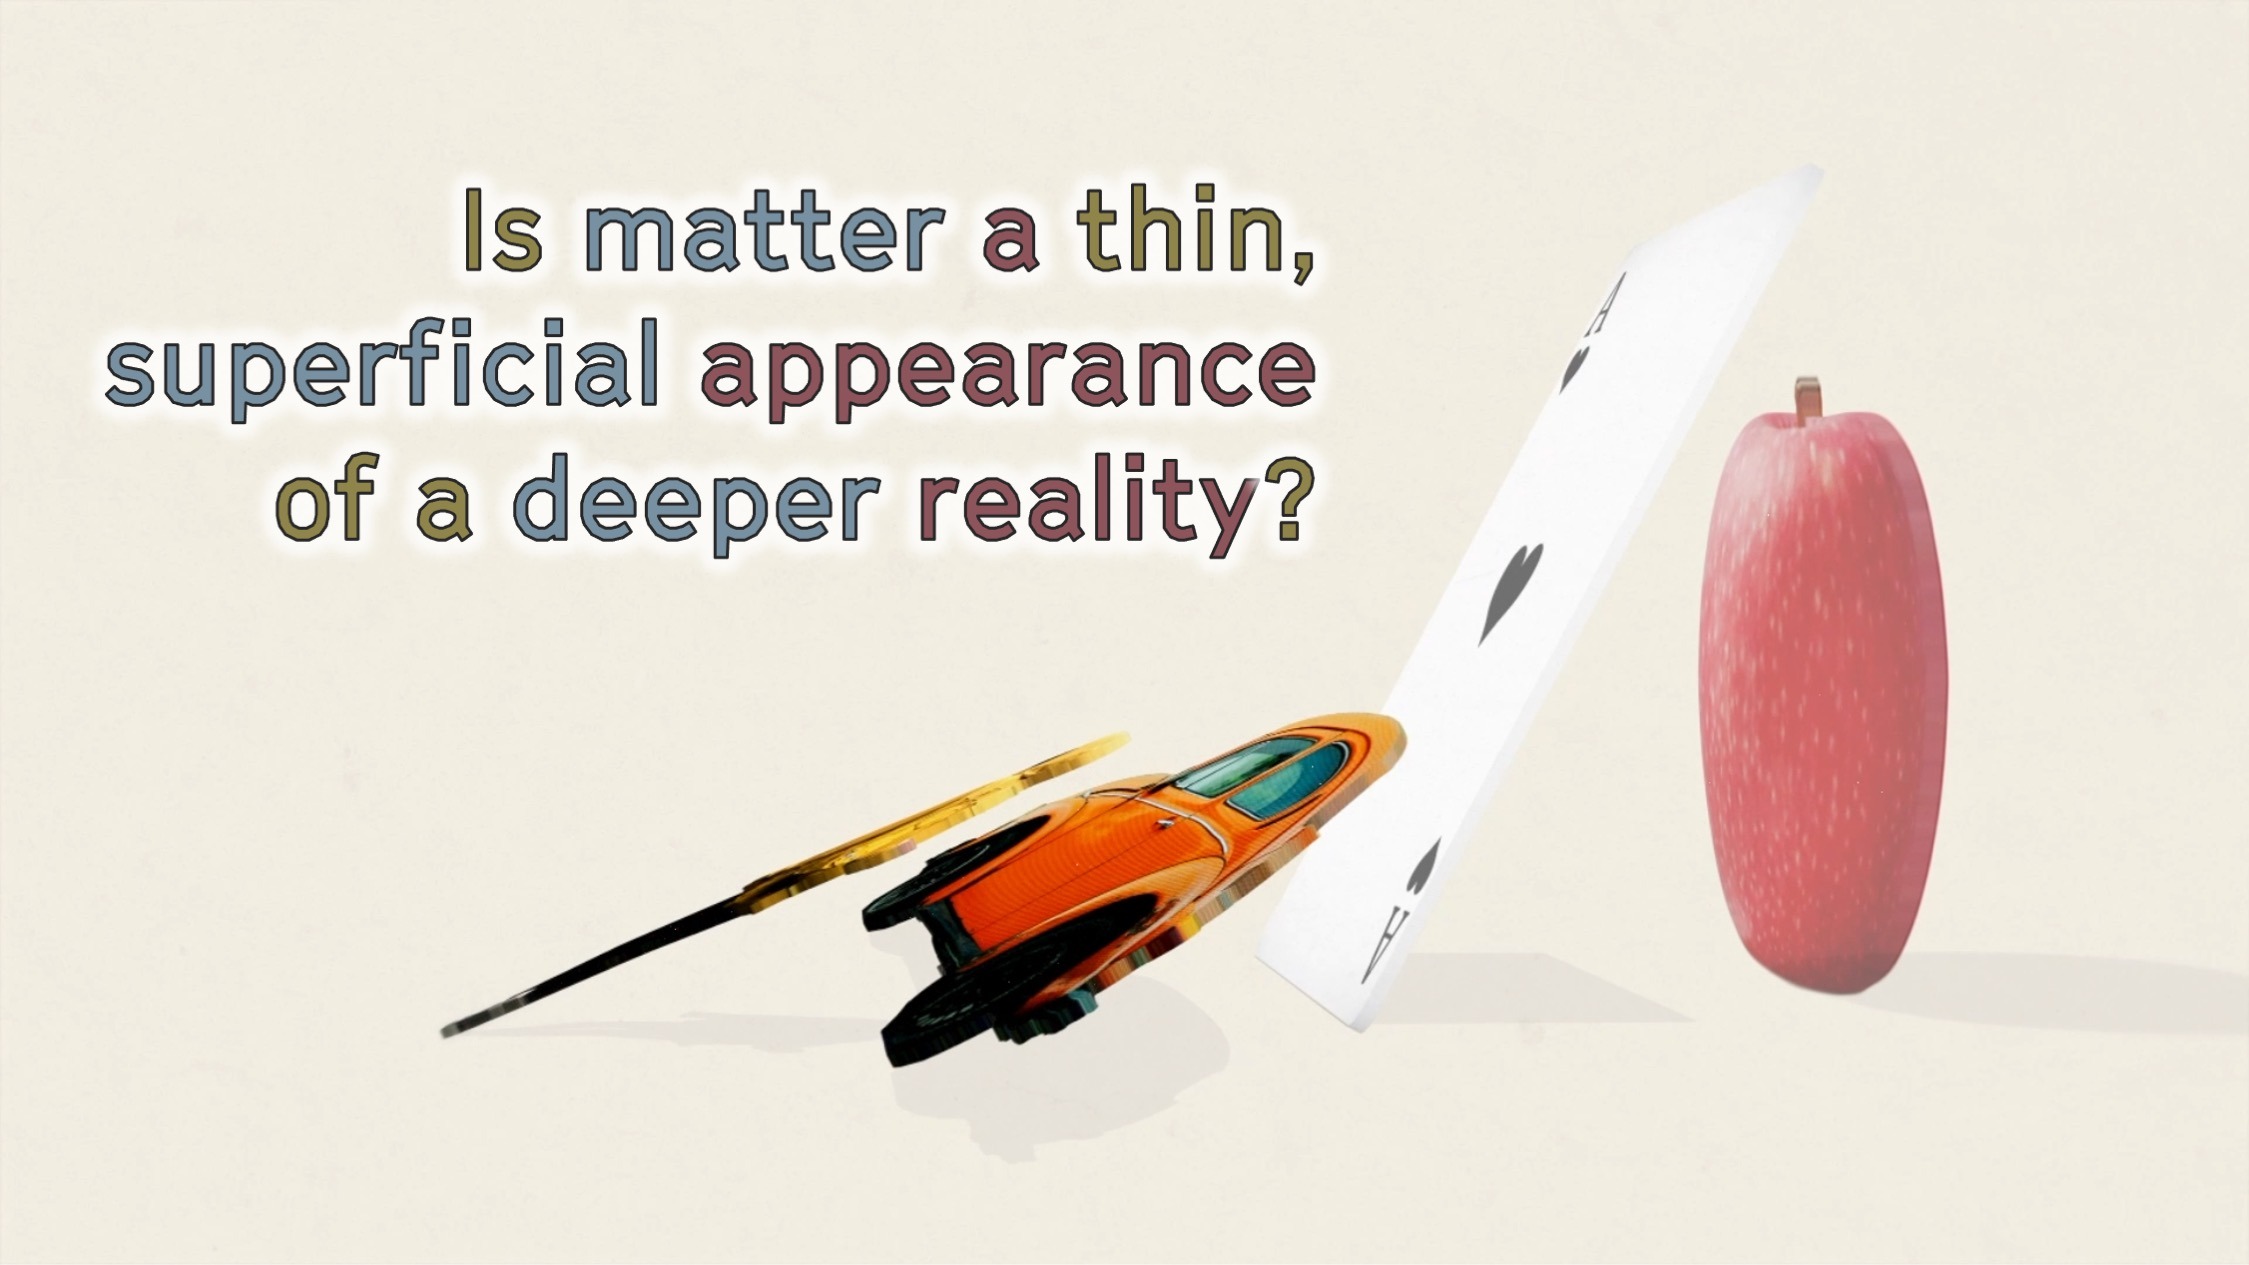 Is matter but a superficial appearance?